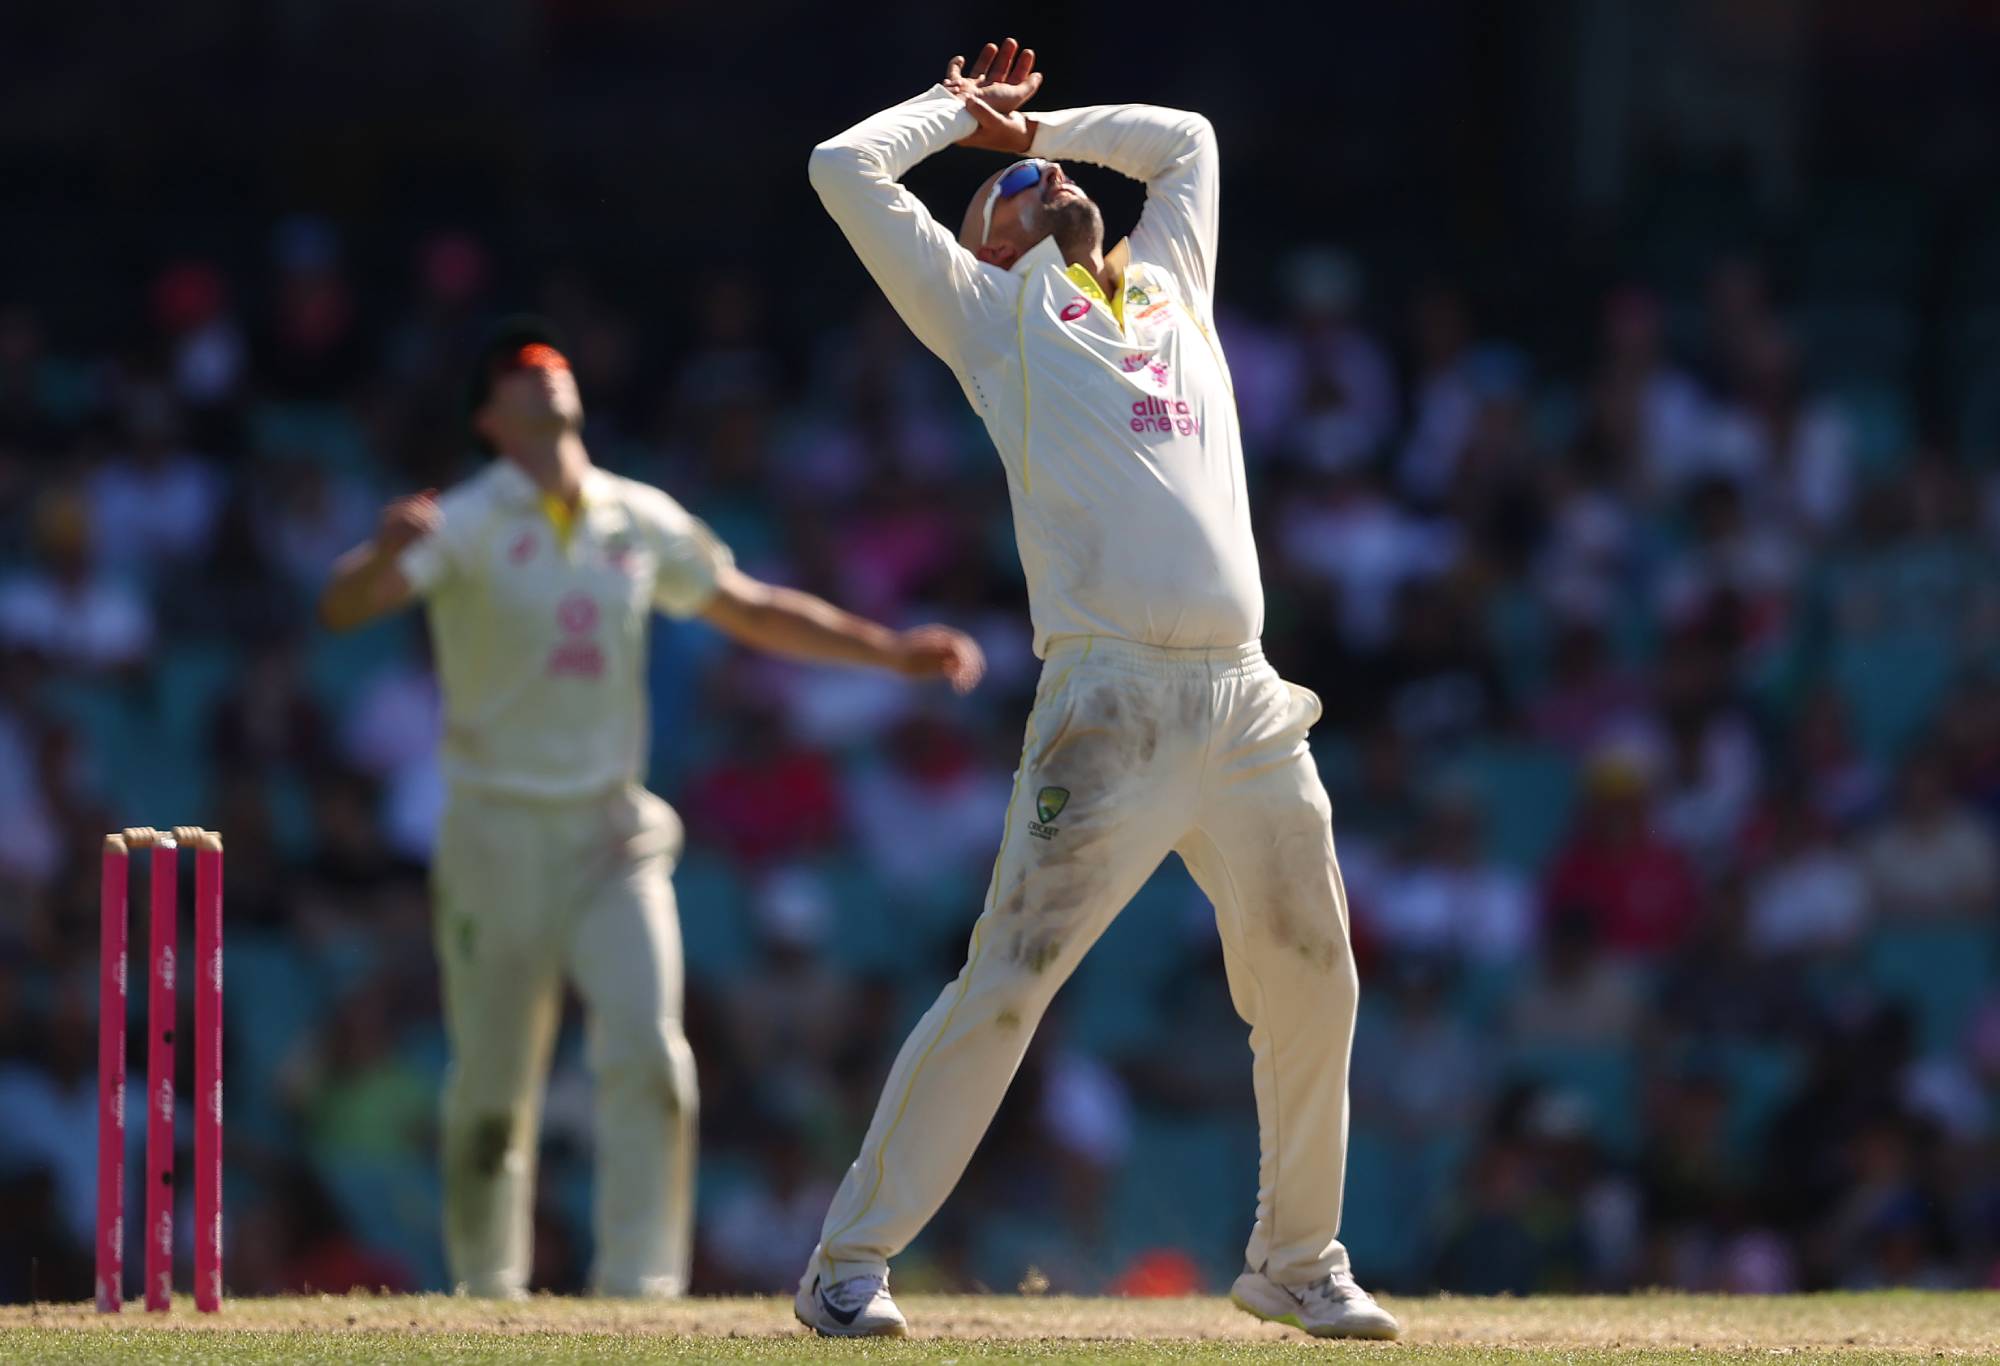 SYDNEY, AUSTRALIA - JANUARY 08: Nathan Lyon of Australia reacts during day five of the Third Test match in the series between Australia and South Africa at Sydney Cricket Ground on January 08, 2023 in Sydney, Australia. (Photo by Mark Kolbe/Getty Images)